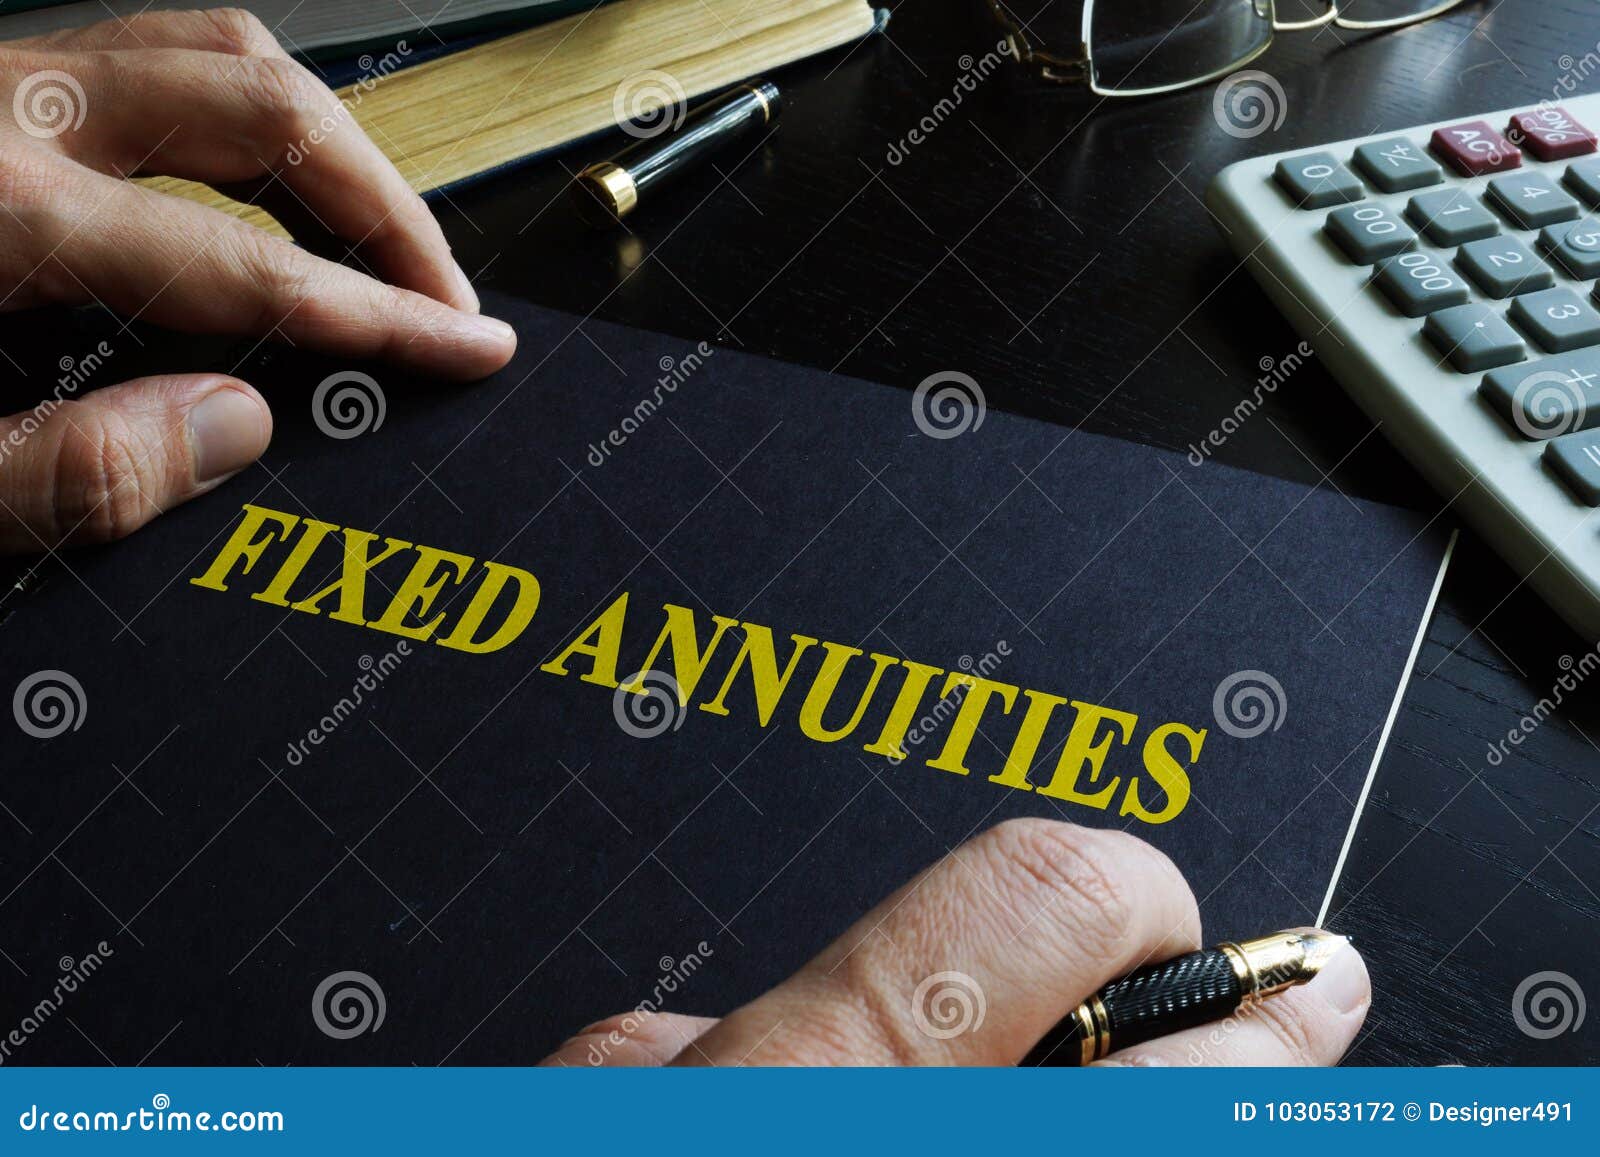 fixed annuities.